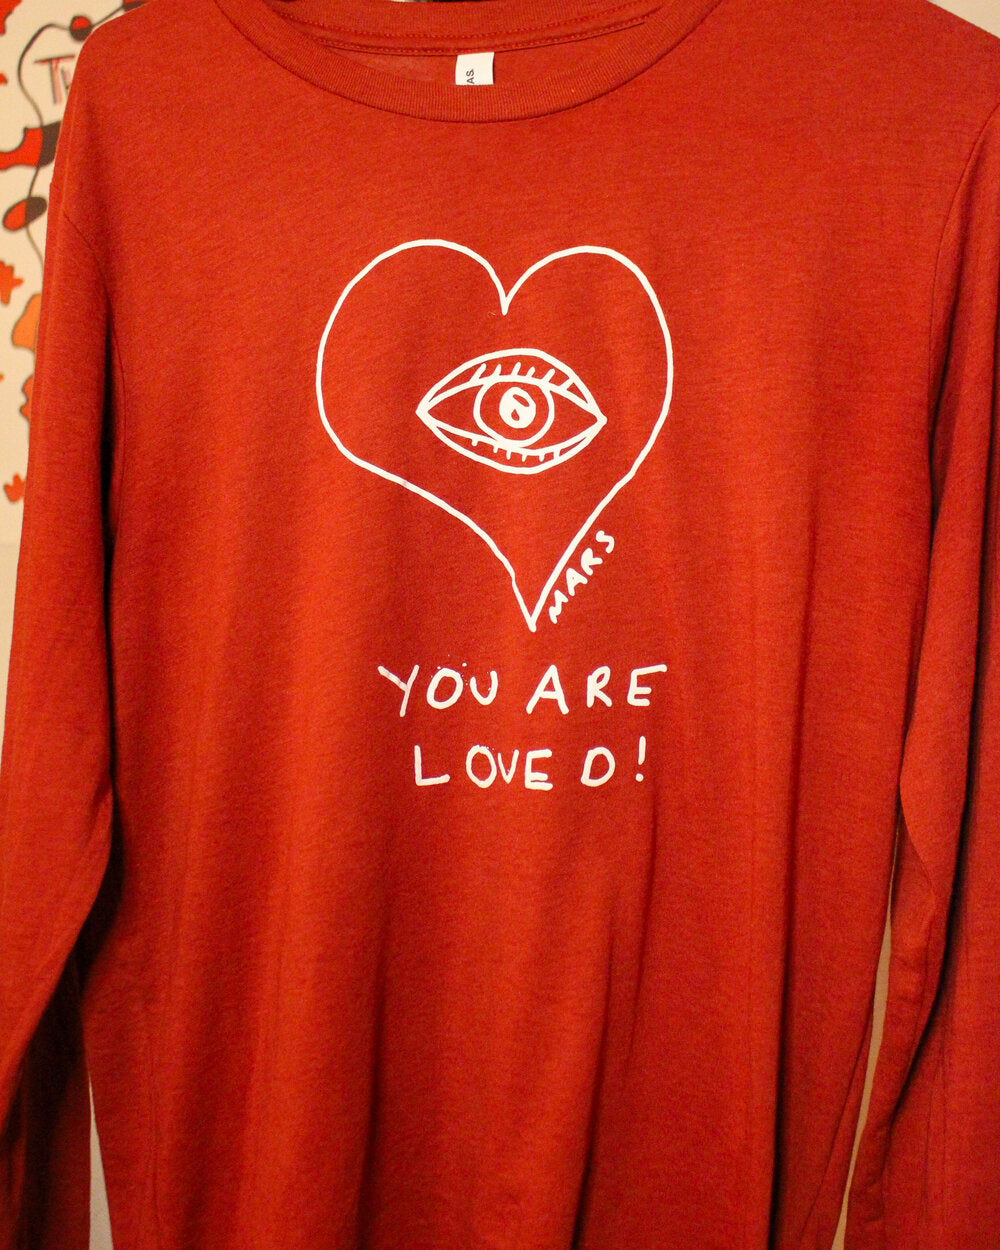 You Are Loved Long Sleeve